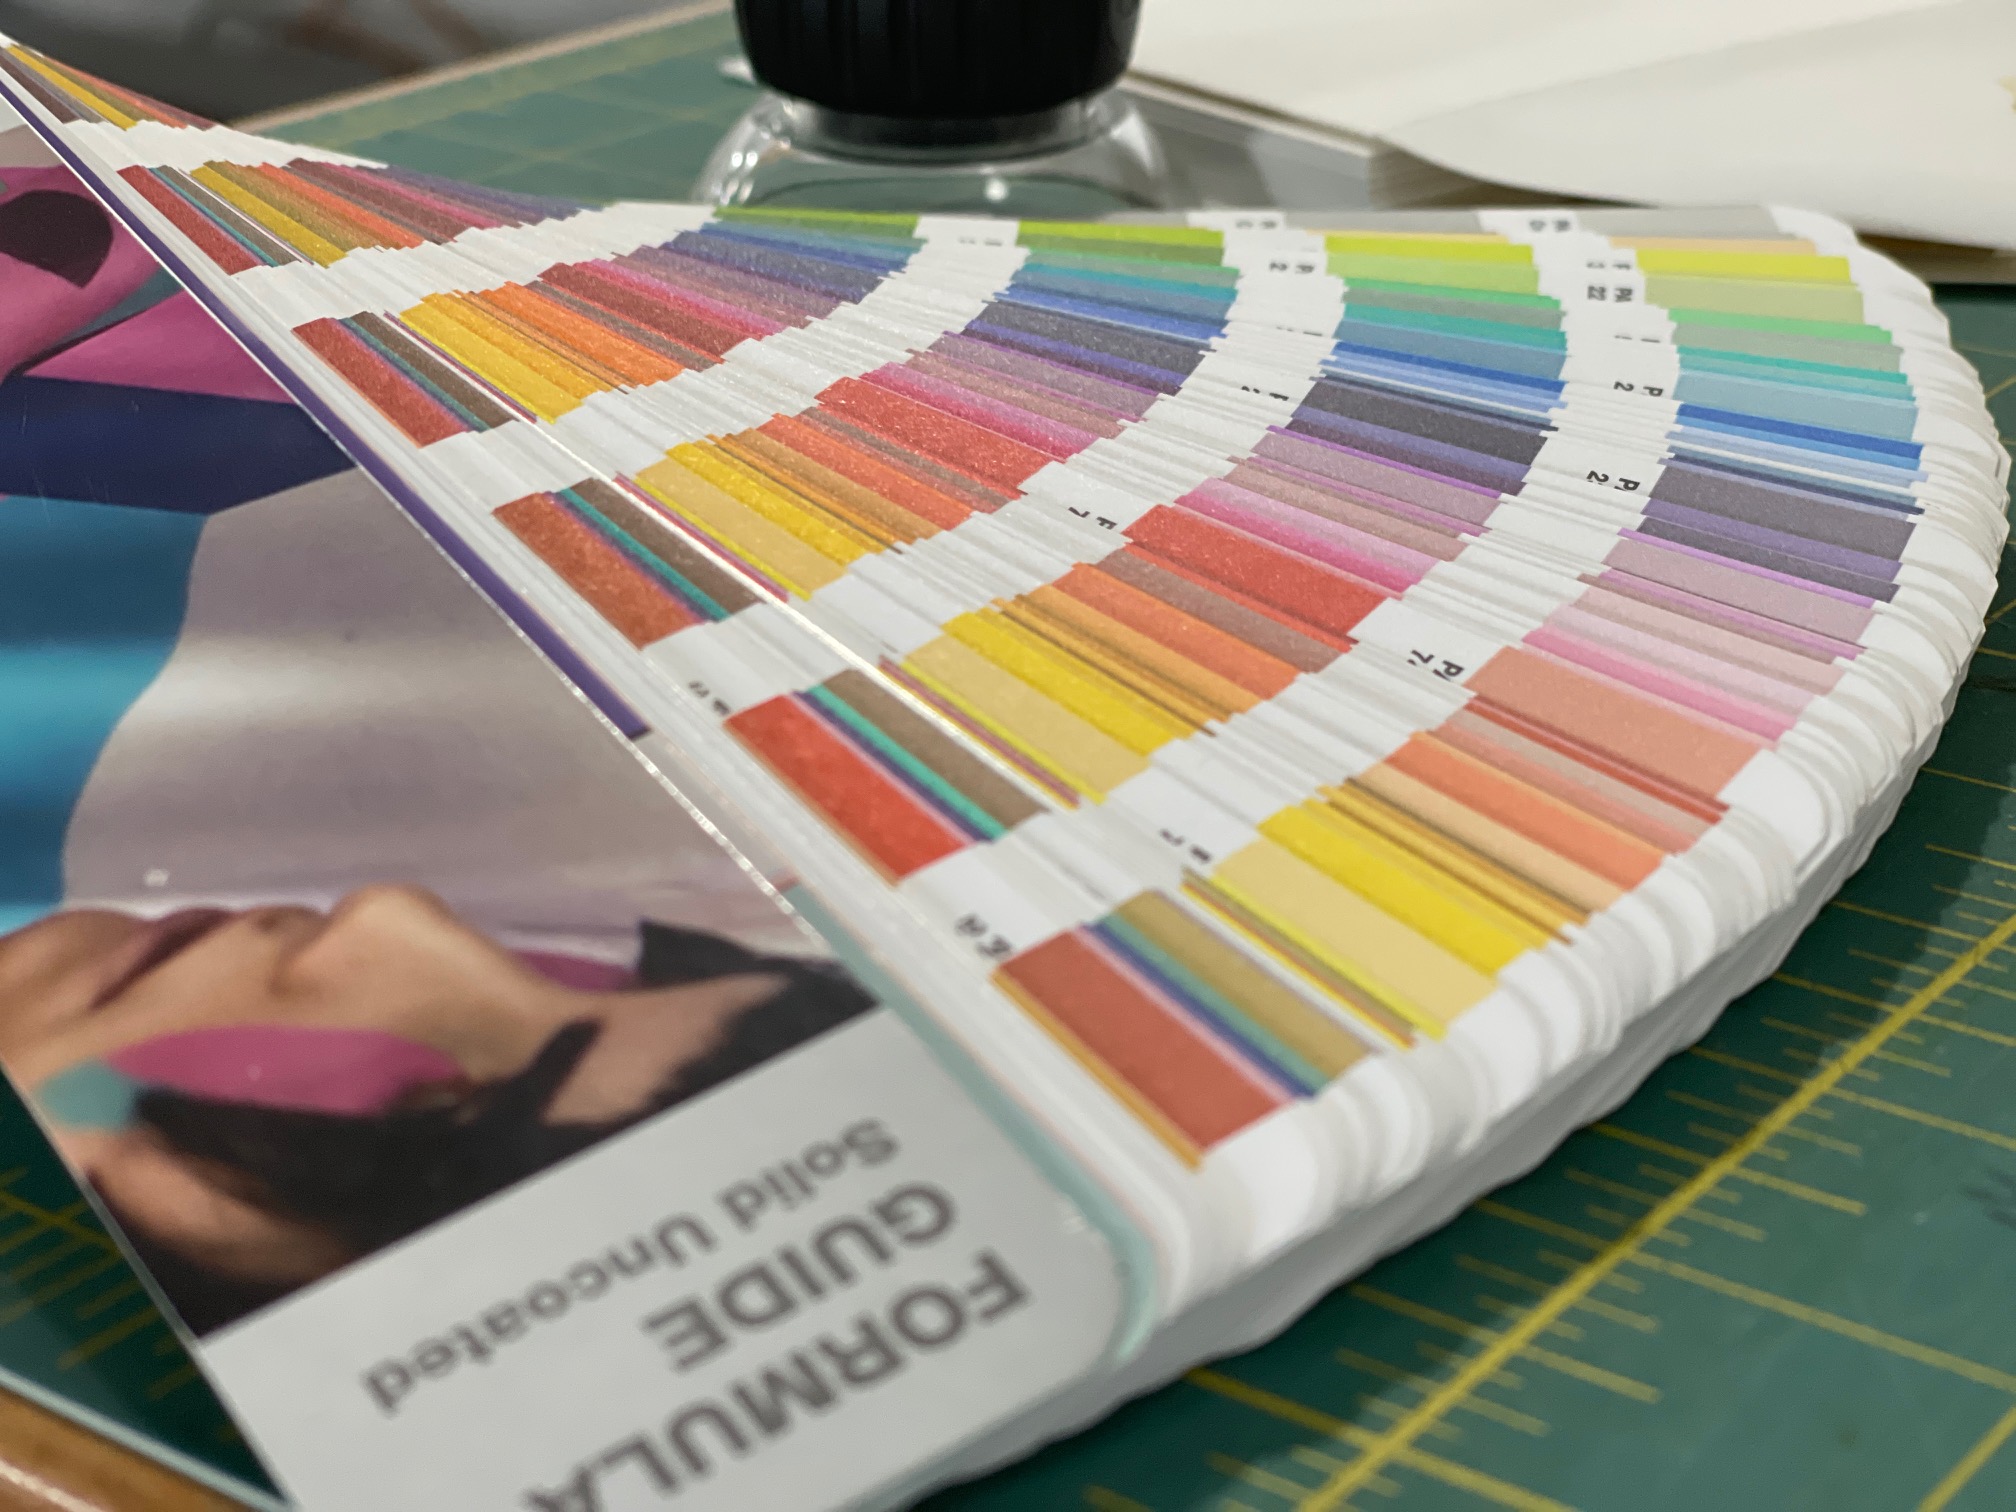 Pantone uncoated color swatch book